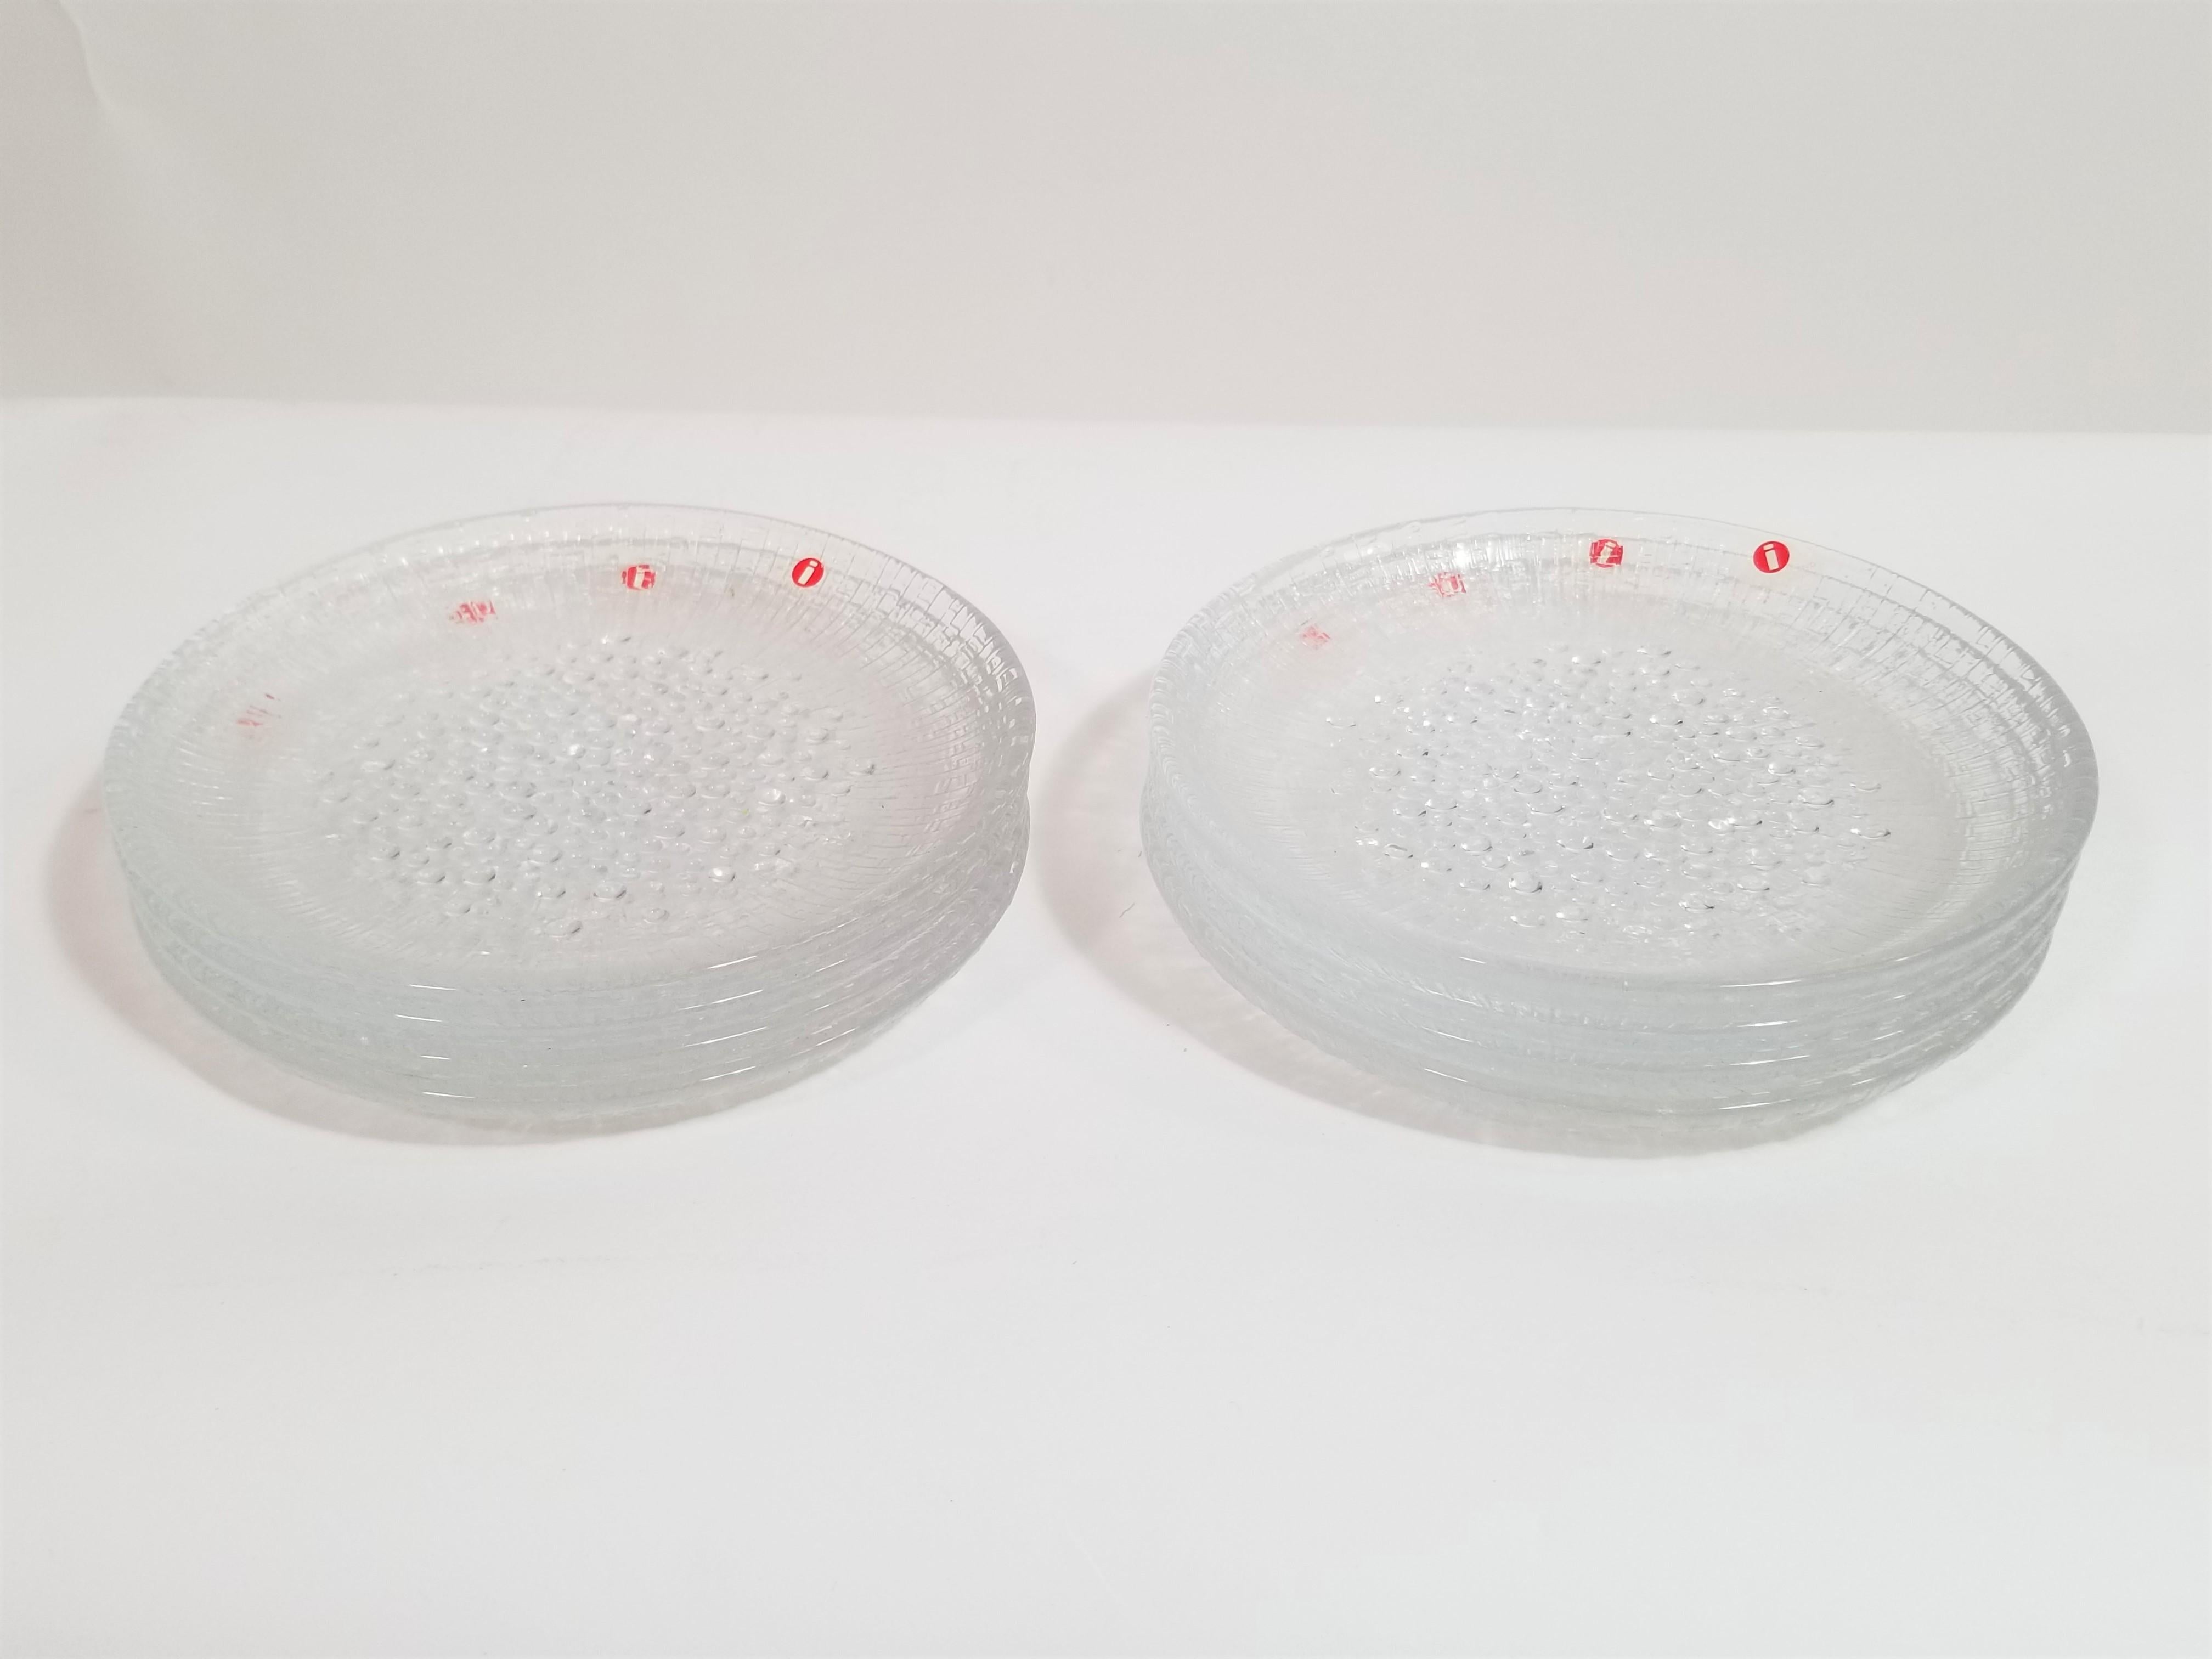 Iittala, Finland. Set of eight art glass side plates. Mulitipupose. Perfect to use for salad, cocktail dessert, bread or hot plates. Unused and still in original packaging boxes. Each Plate still retains original iittala marking sticker.